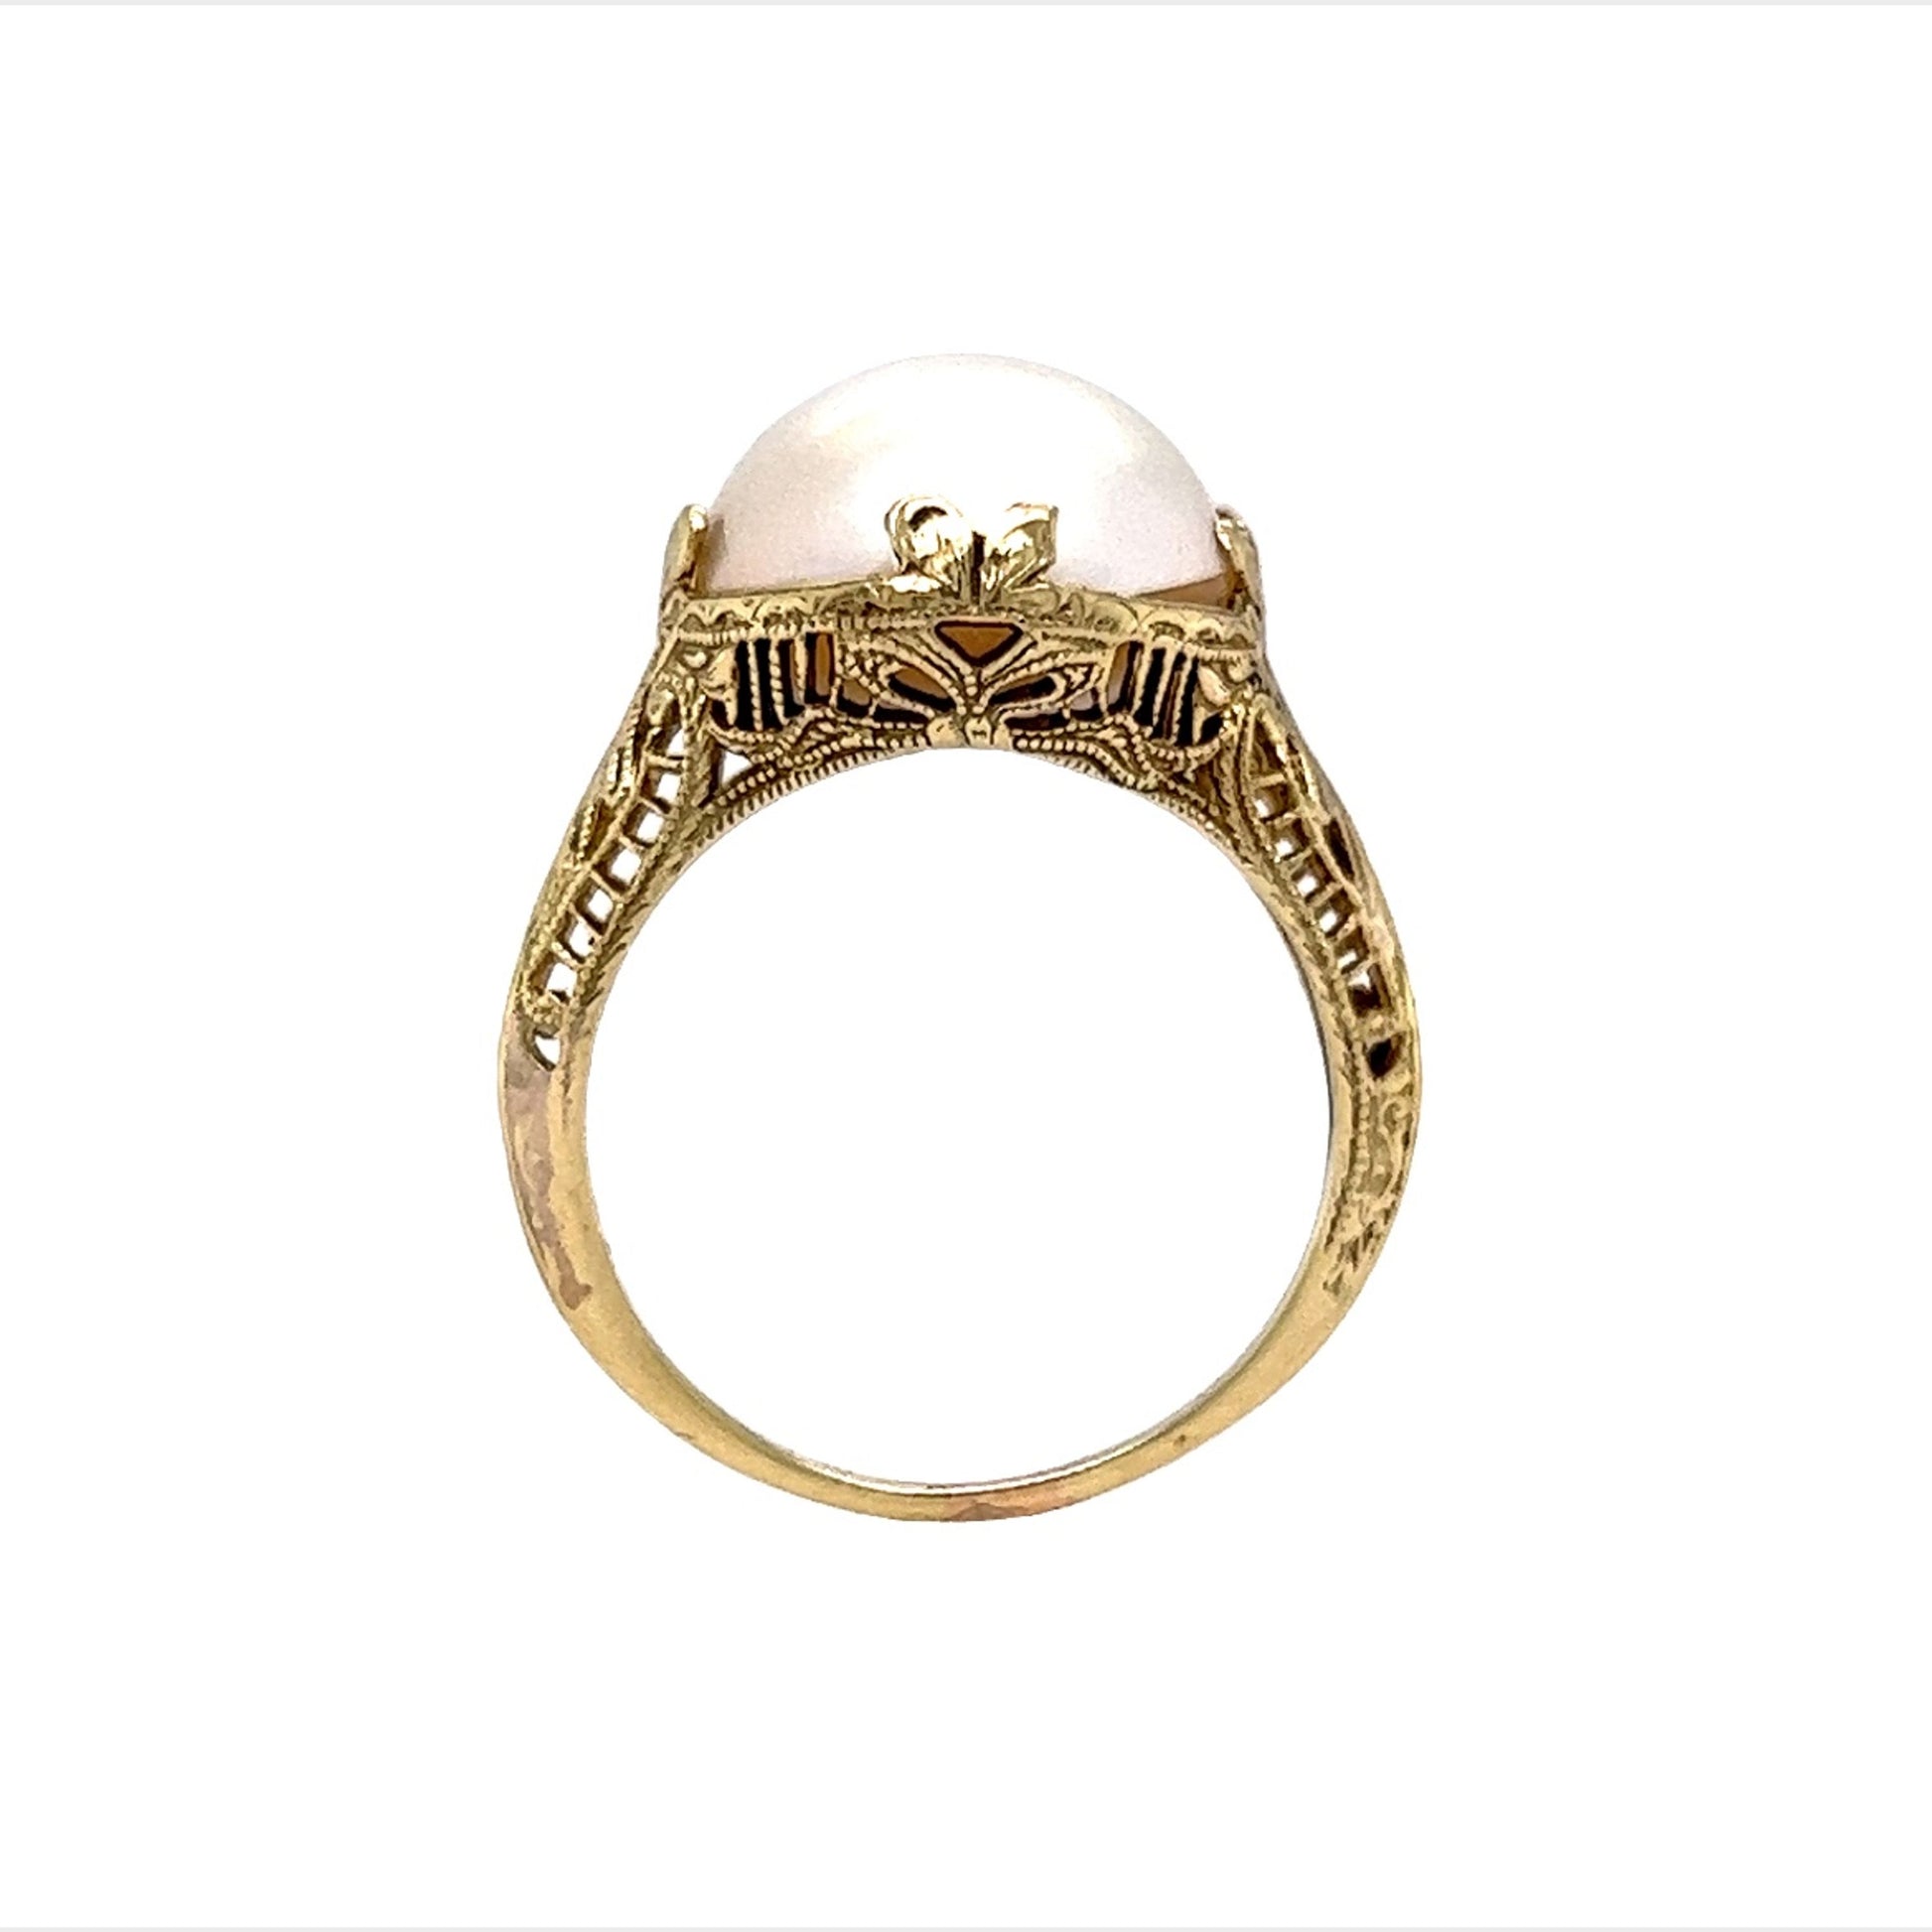 Vintage Inspired Mabe Pearl Ring in 14k Yellow Gold